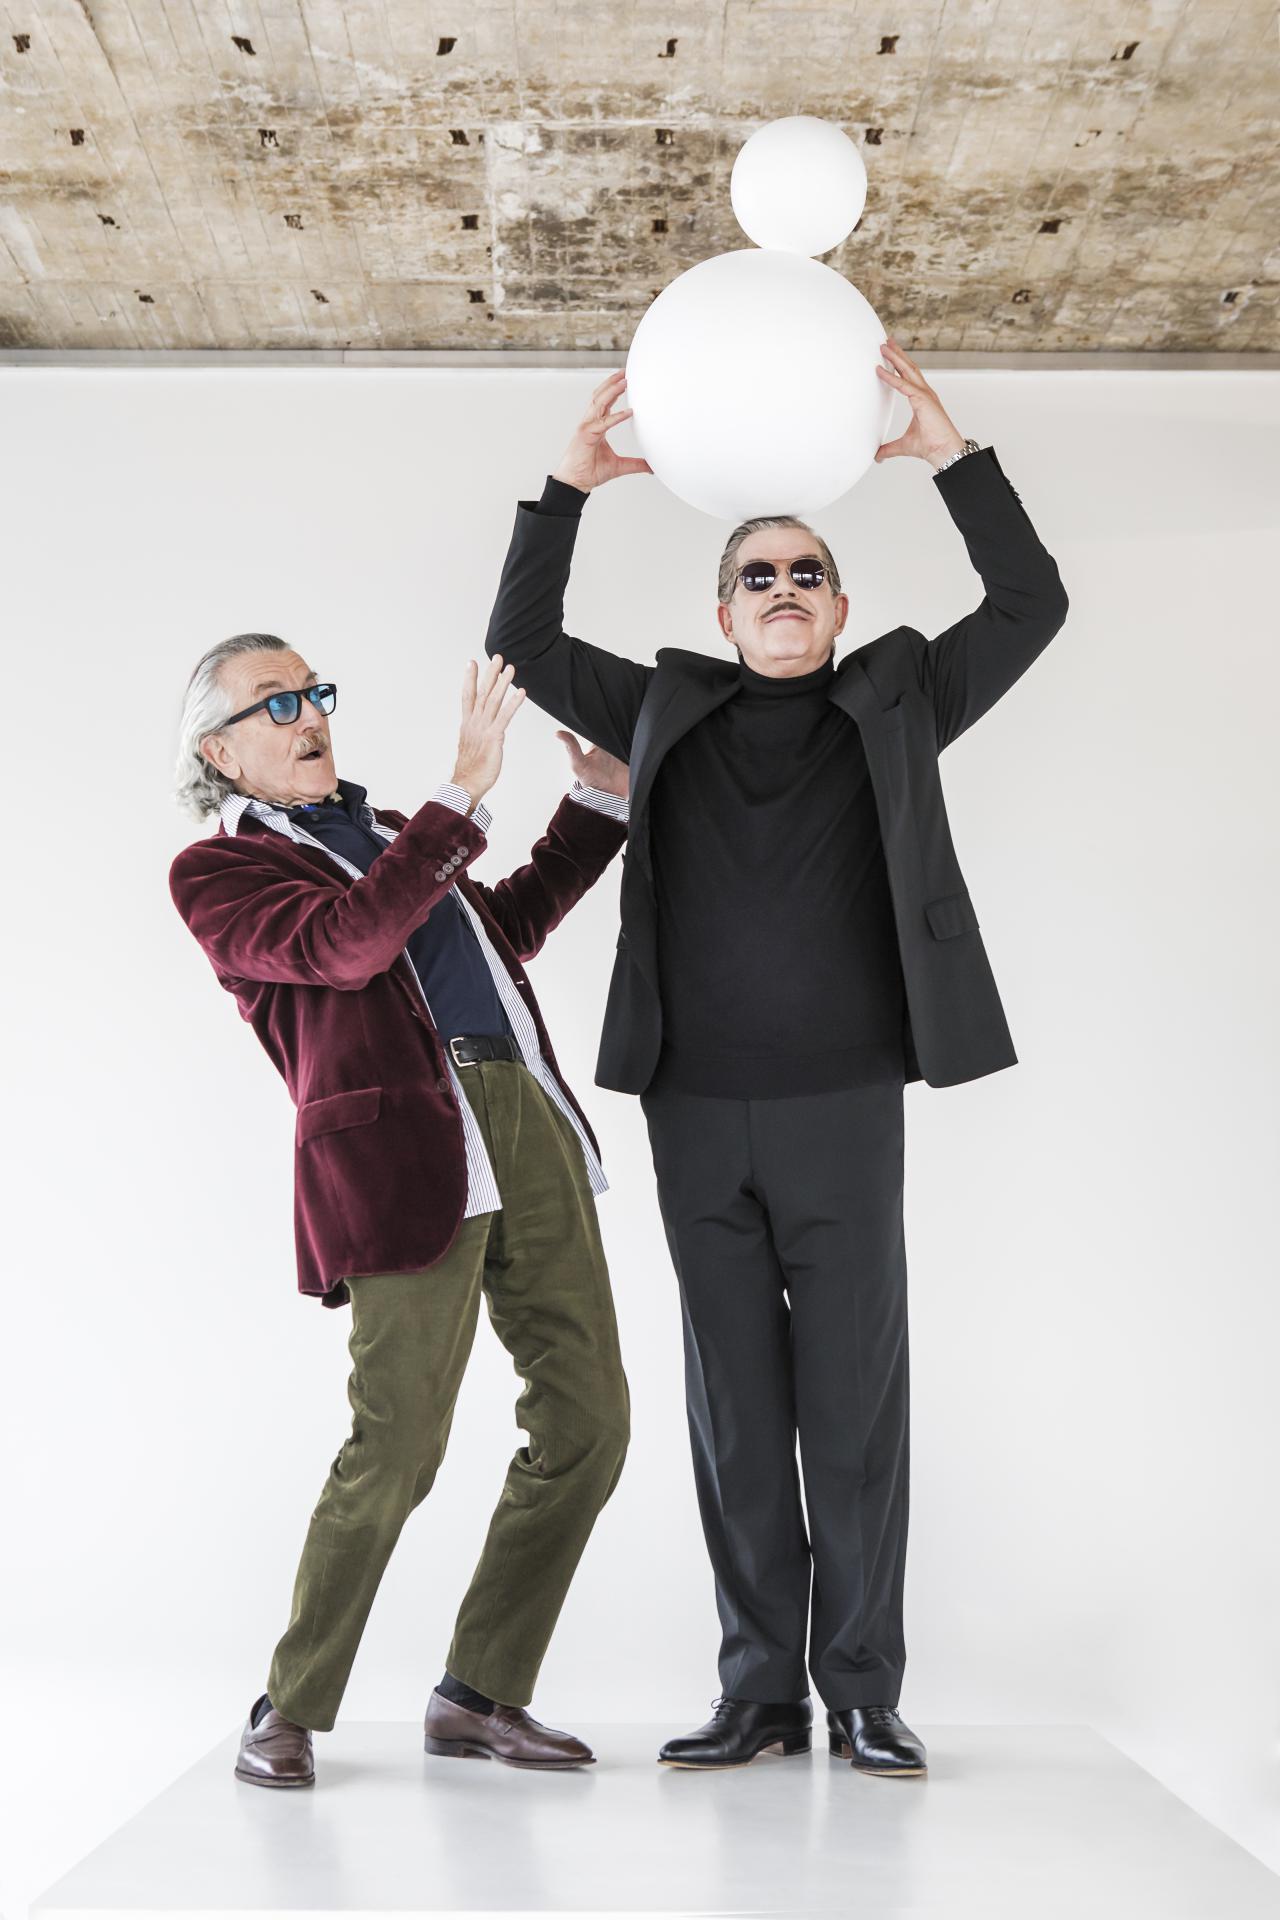 The musician duo Yello stands side by side in front of a wall. The one on the right wears a suit and holds a sculpture of two round balls above his head. The left one stands next to him in an intercepting position.